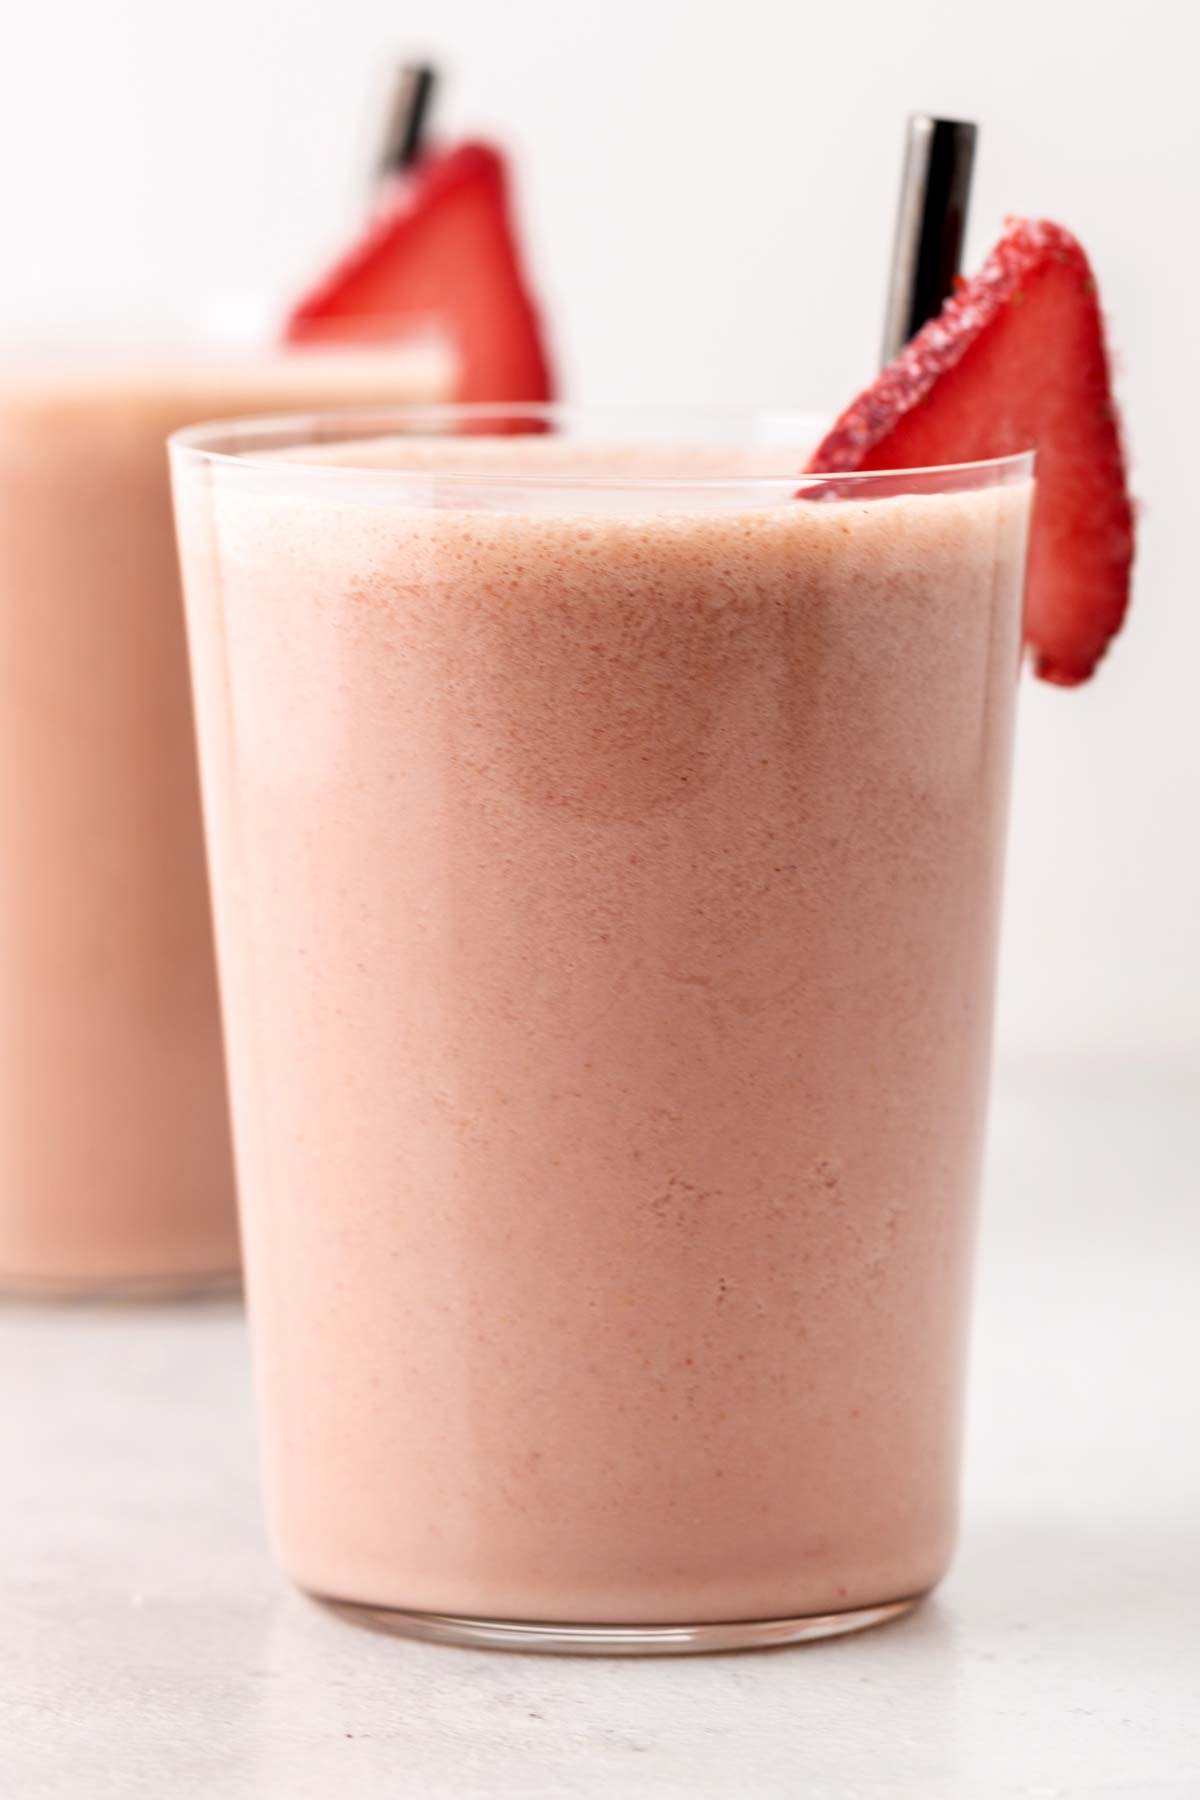 Strawberry protein shake in a glass.